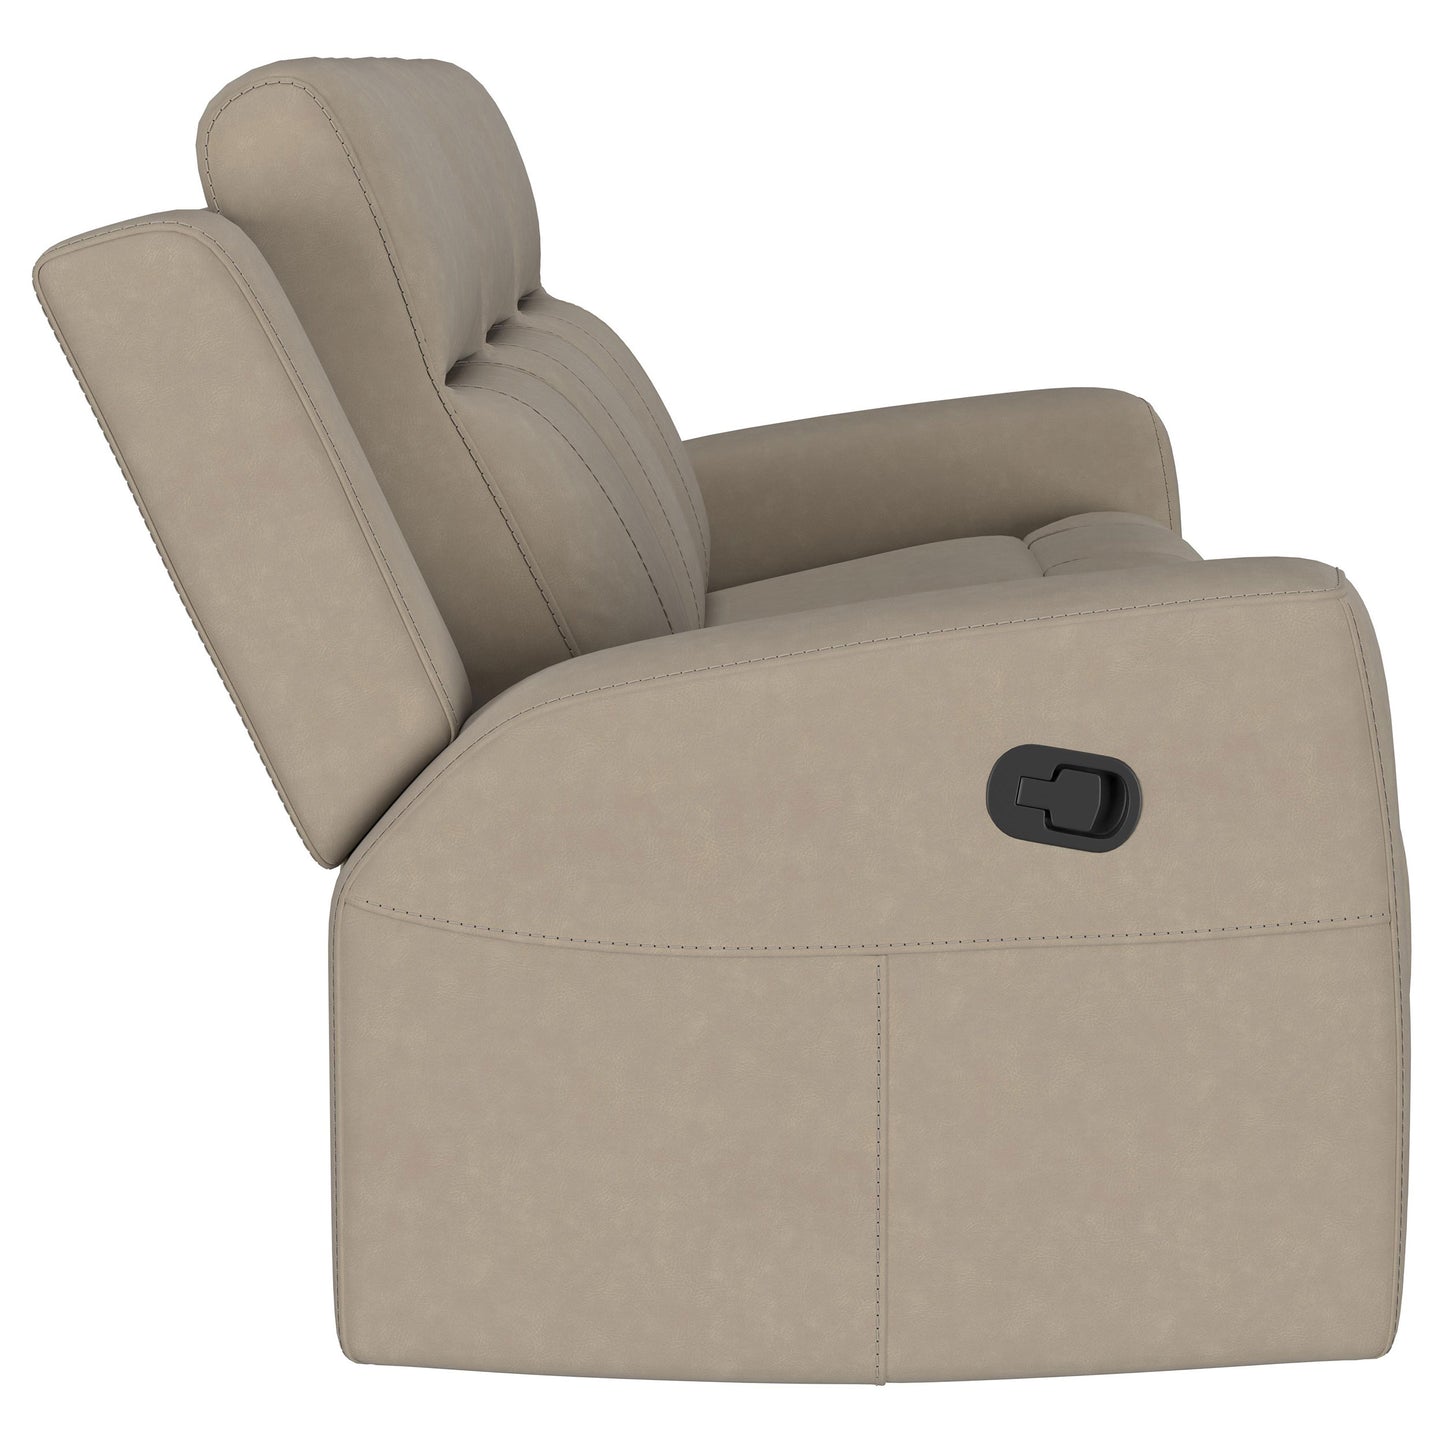 Brentwood 3-piece Upholstered Motion Reclining Sofa Set Taupe